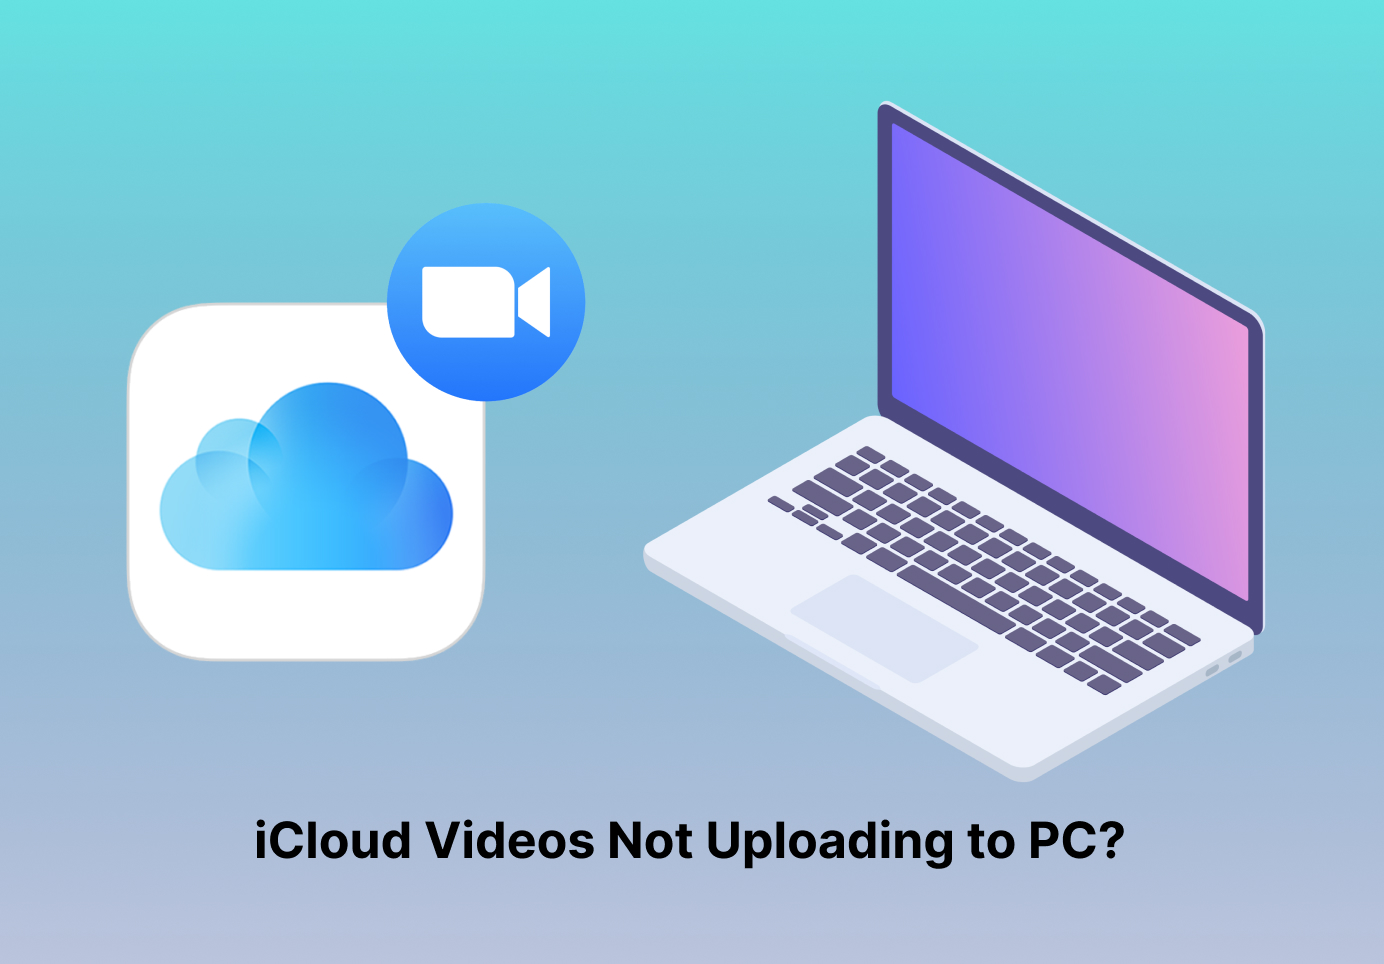 9 Solutions to iCloud Video Not Uploading on PC